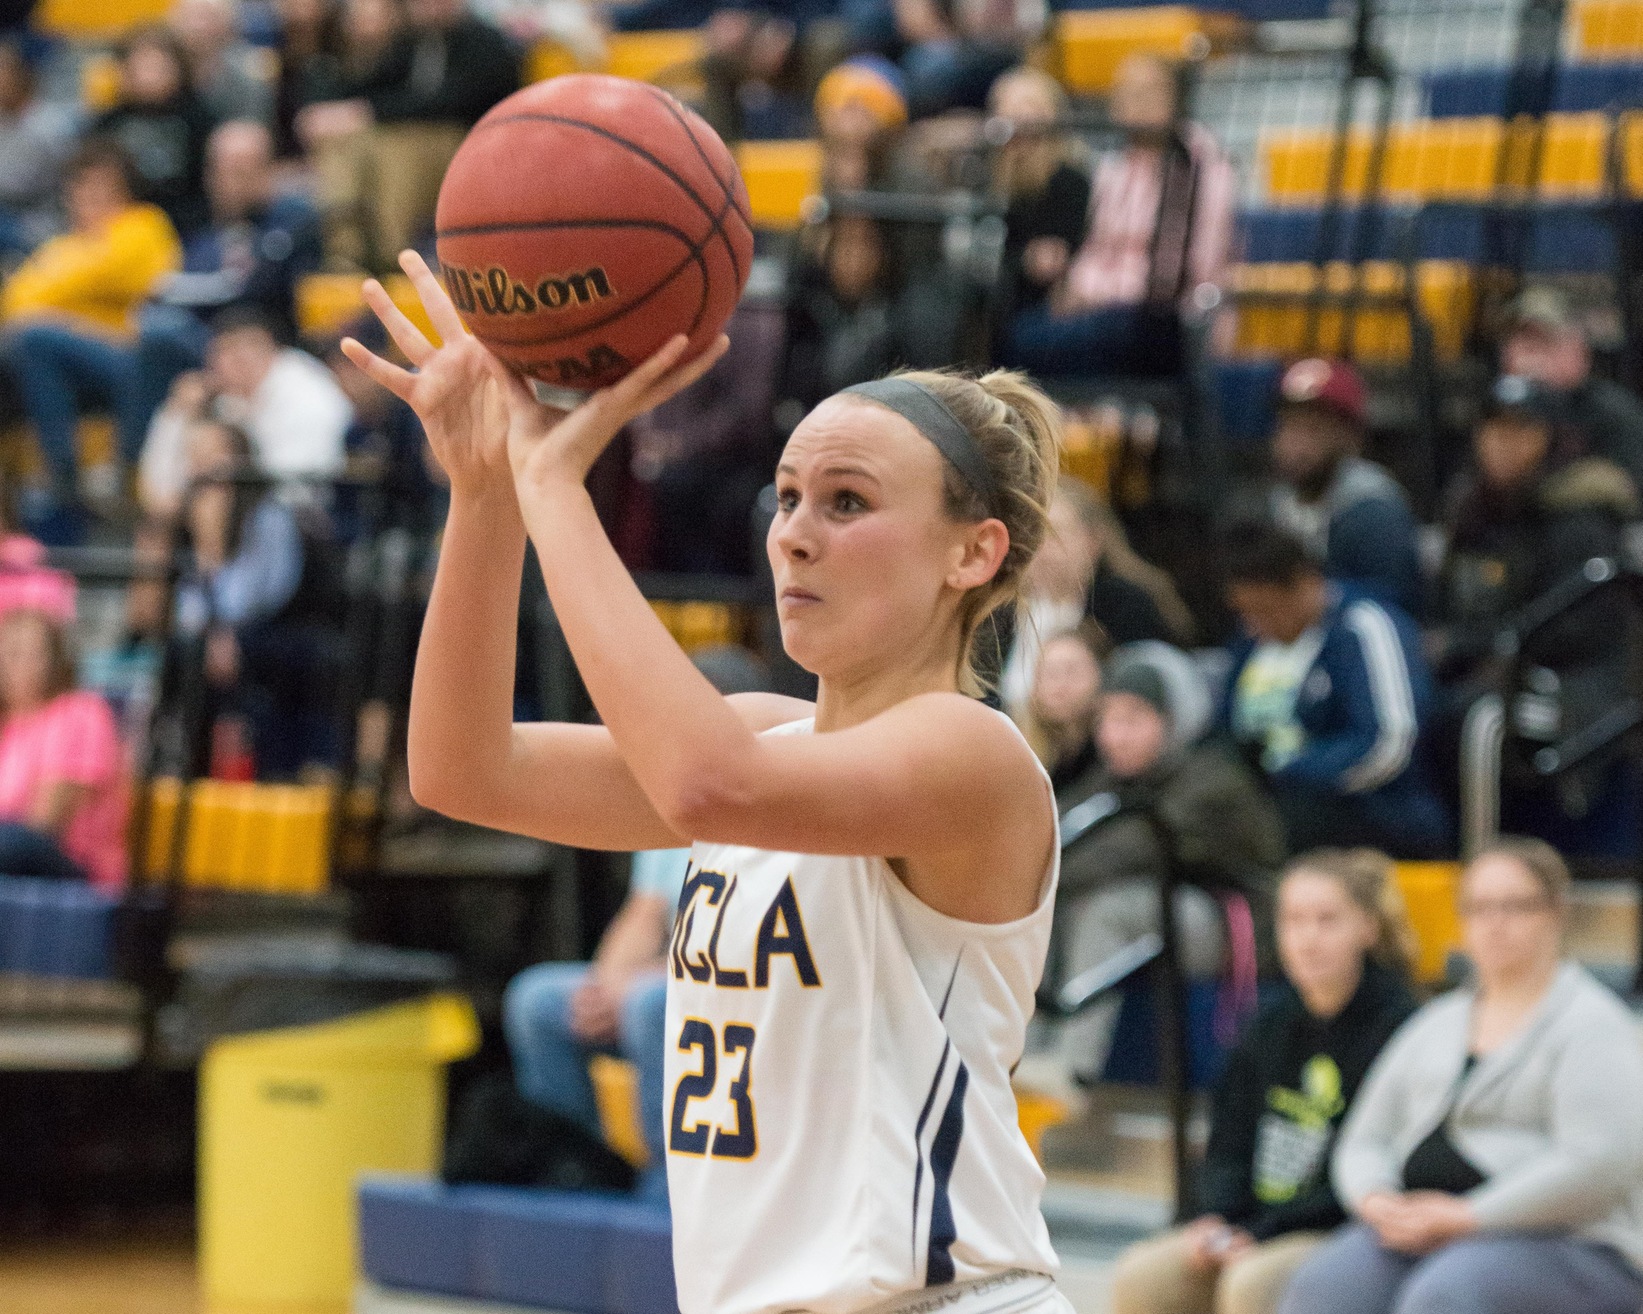 Second half dooms MCLA women in loss to Babson at Naismith tournament